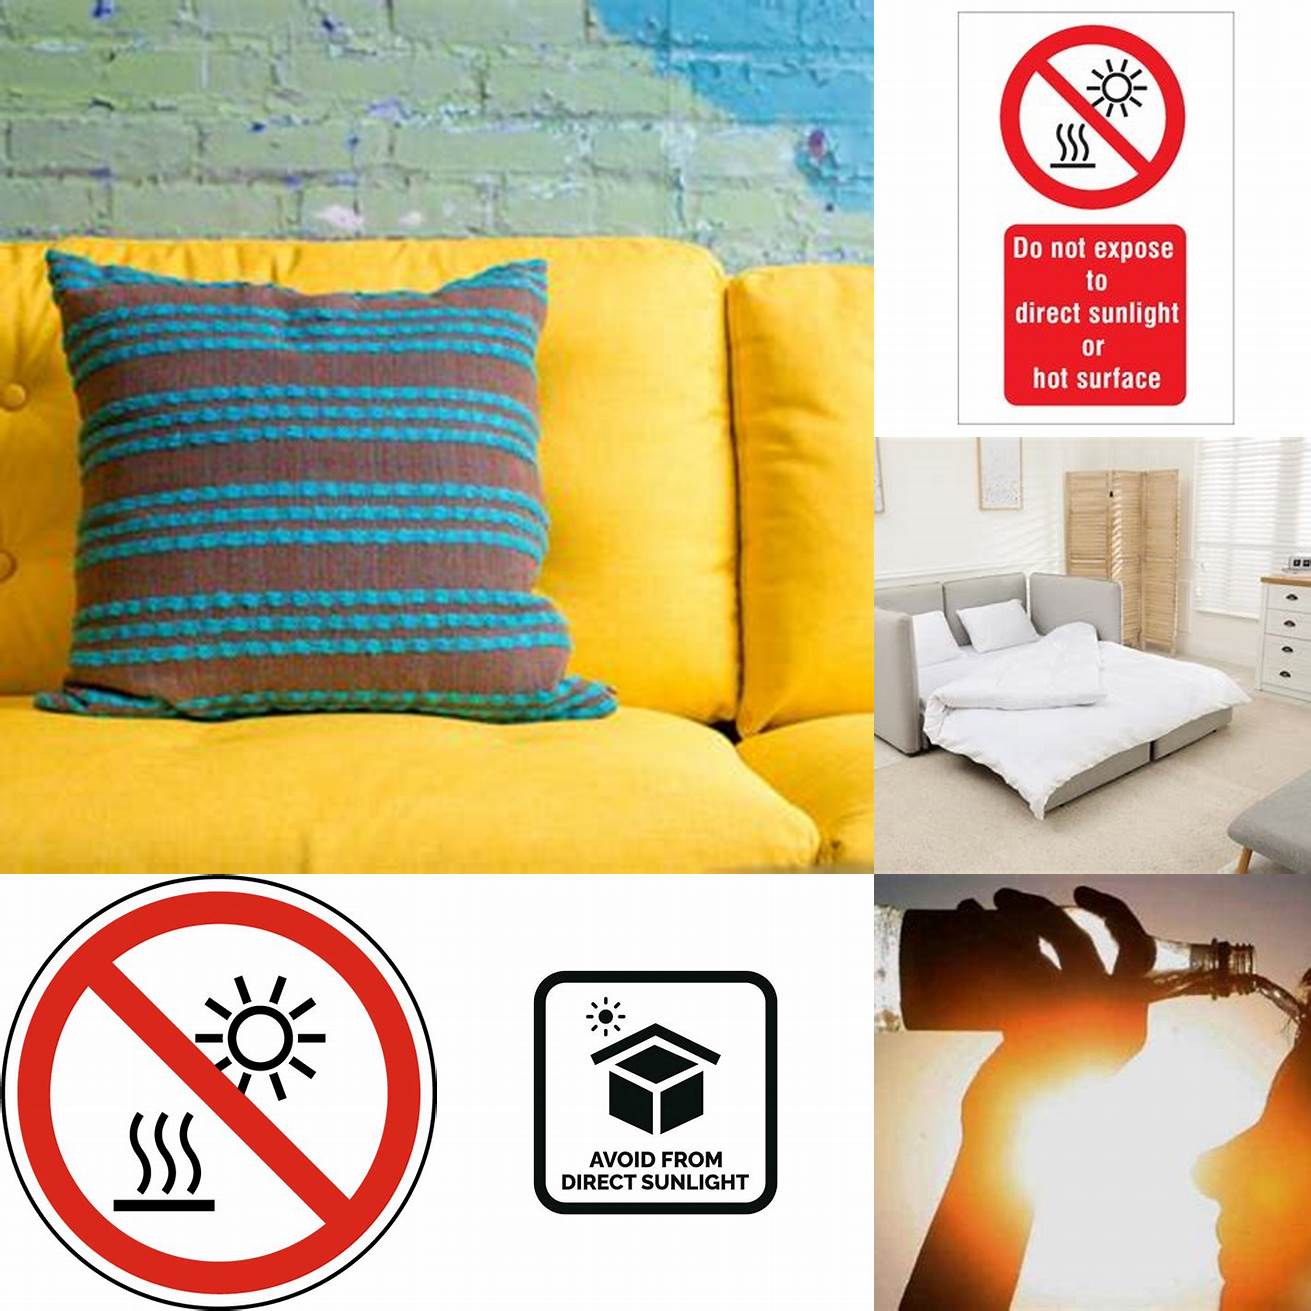 Avoid exposing the sofa to direct sunlight or heat sources as they can cause fading or damage to the material